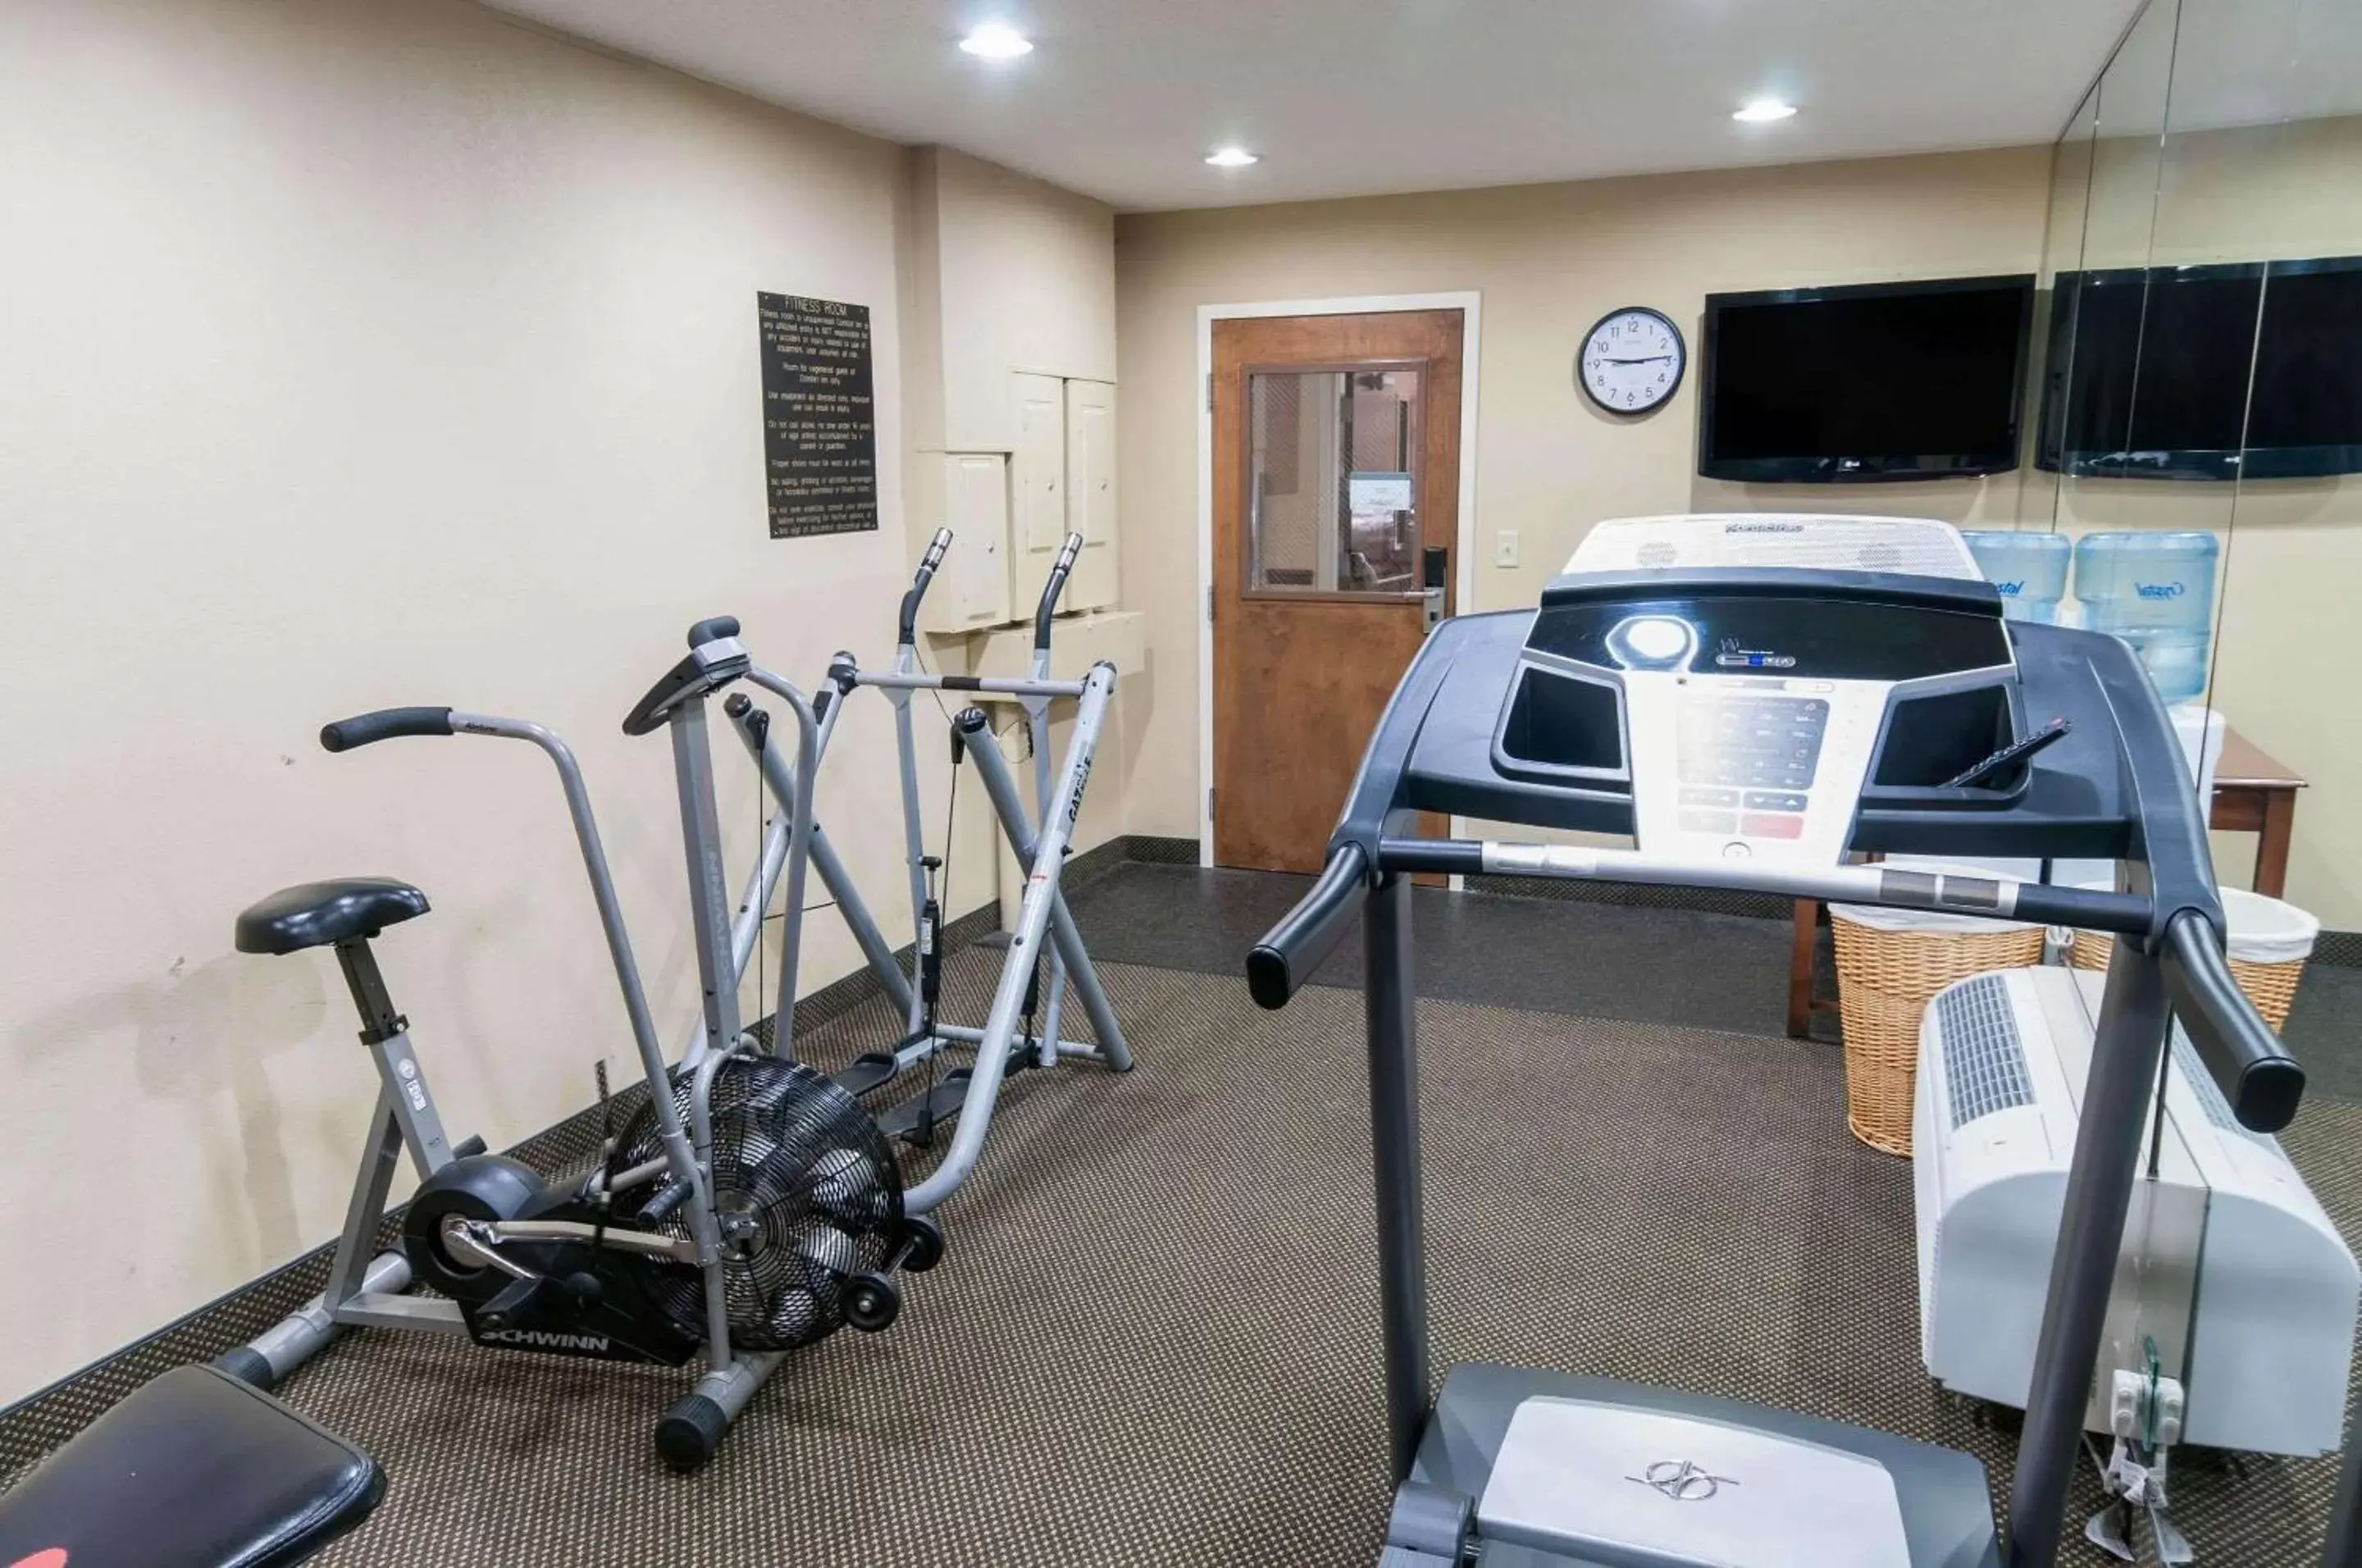 Fitness centre/facilities, Fitness Center/Facilities in Comfort Inn Amish Country